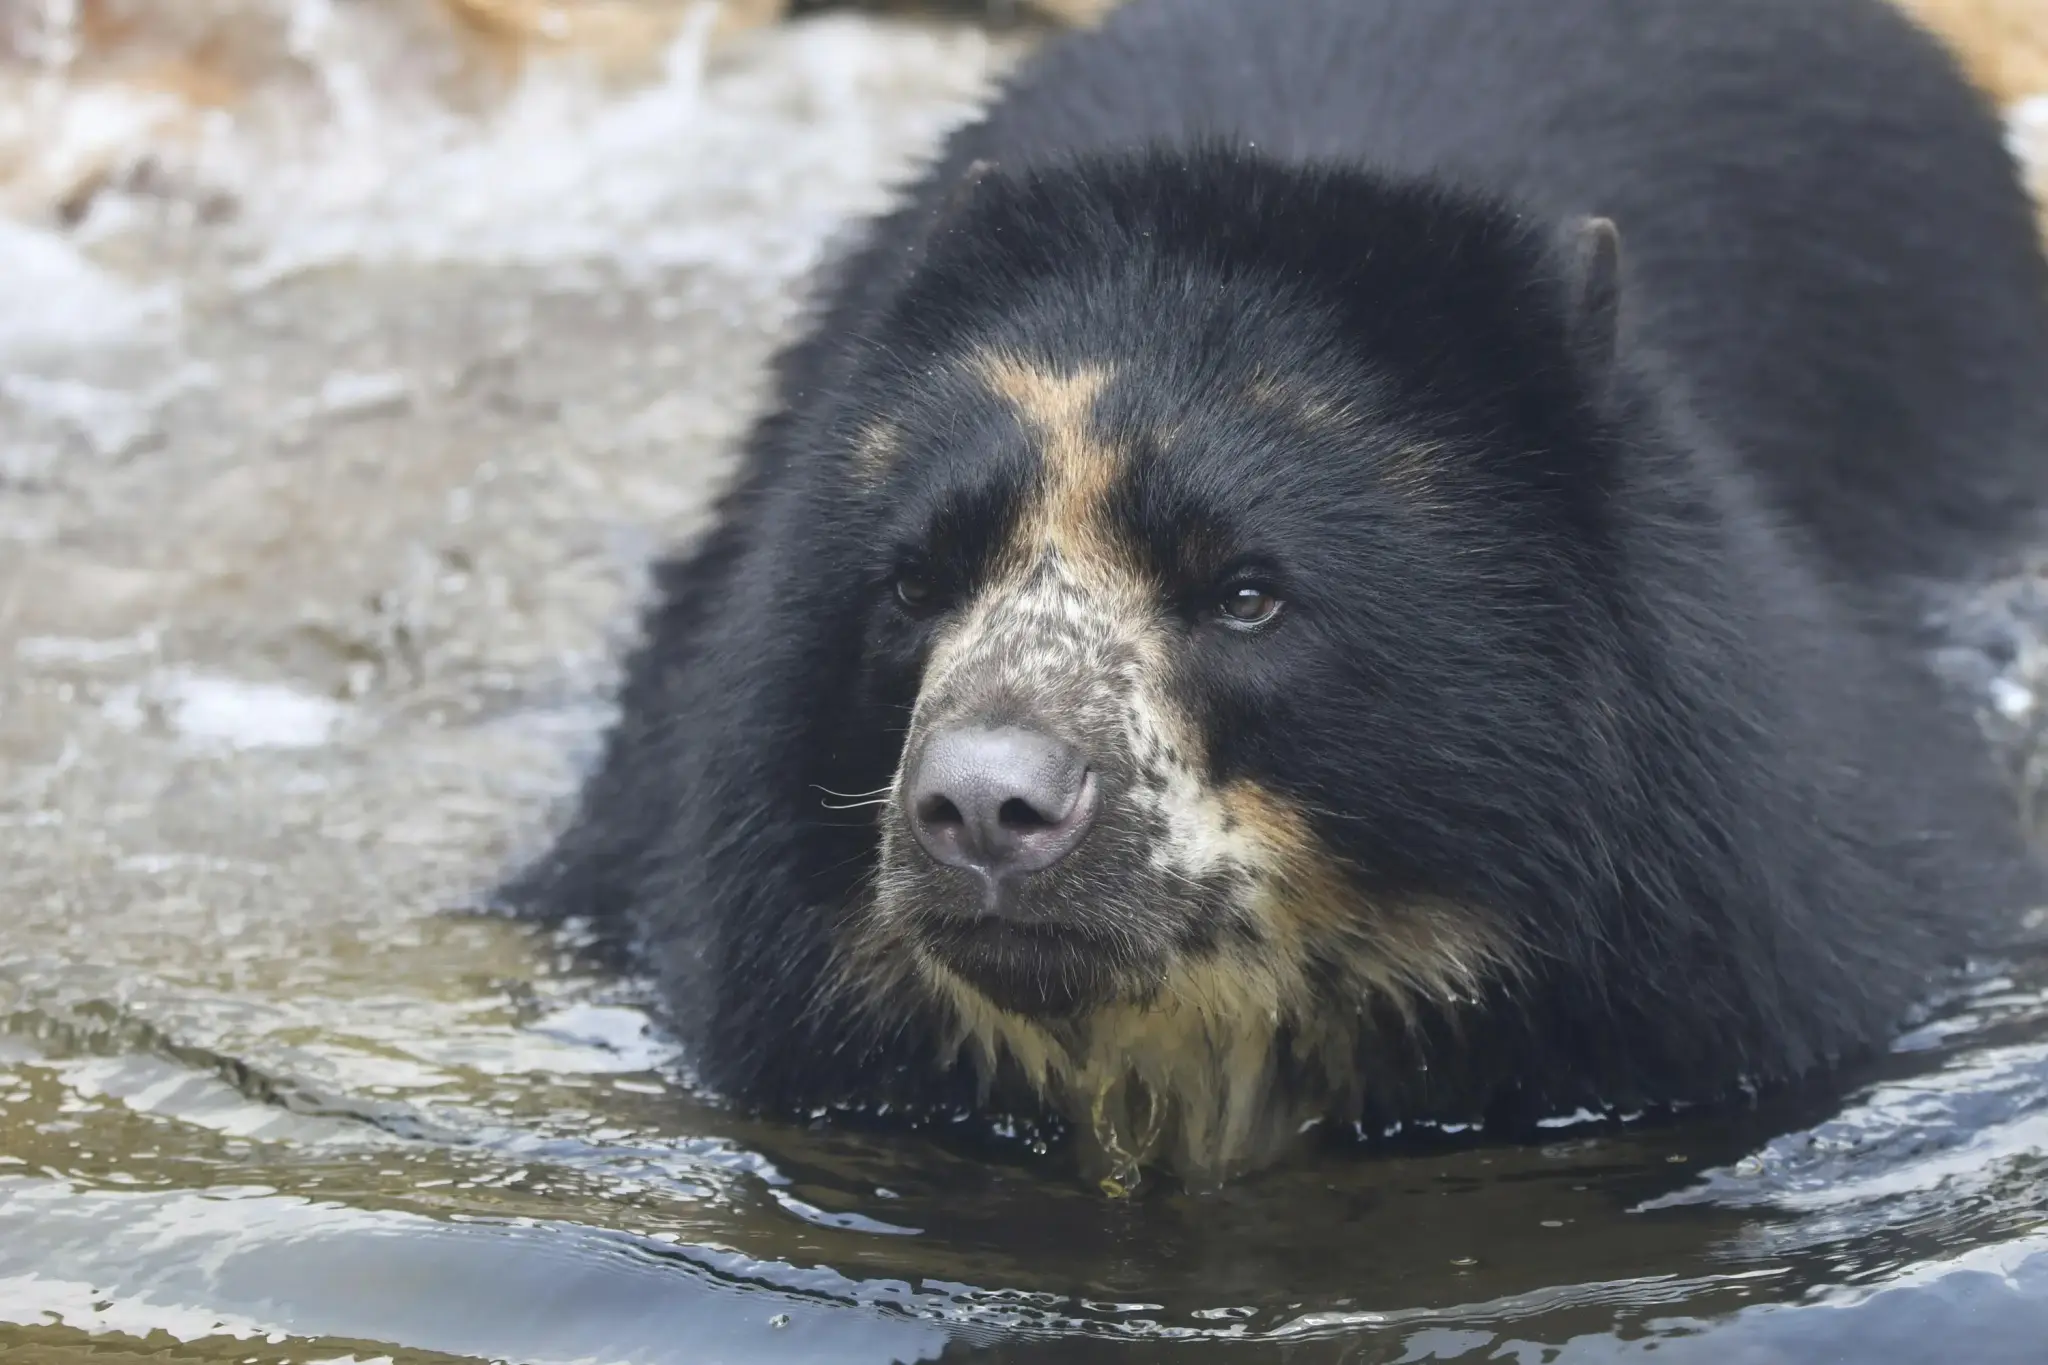 Escape-artist Missouri bear heads to Texas zoo with moat